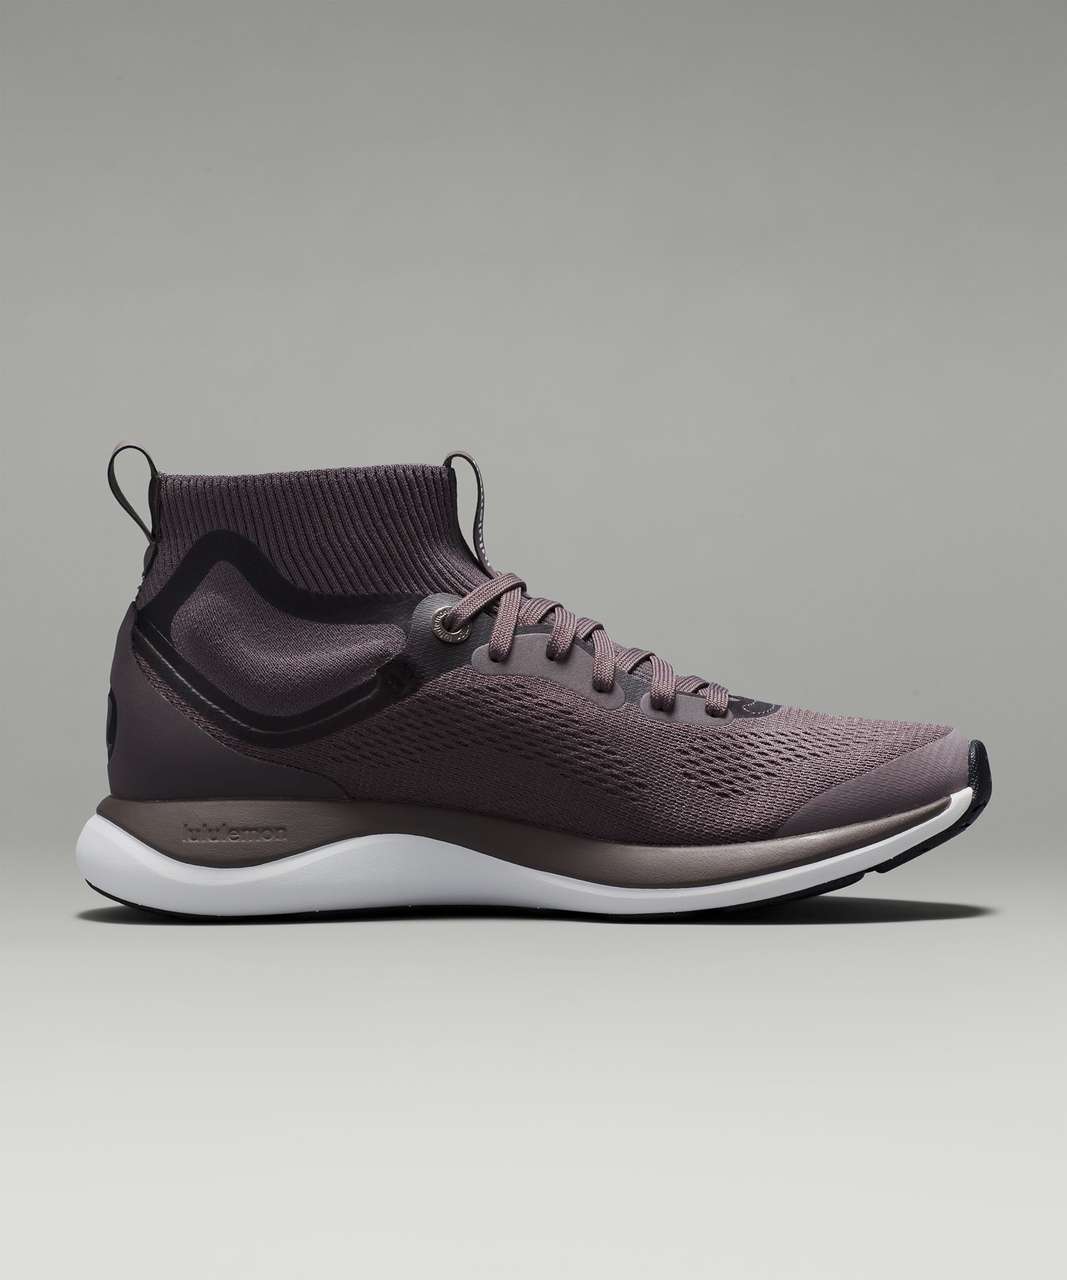 Lululemon Chargefeel Mid Womens Workout Shoe - Anchor / White / Graphite Grey